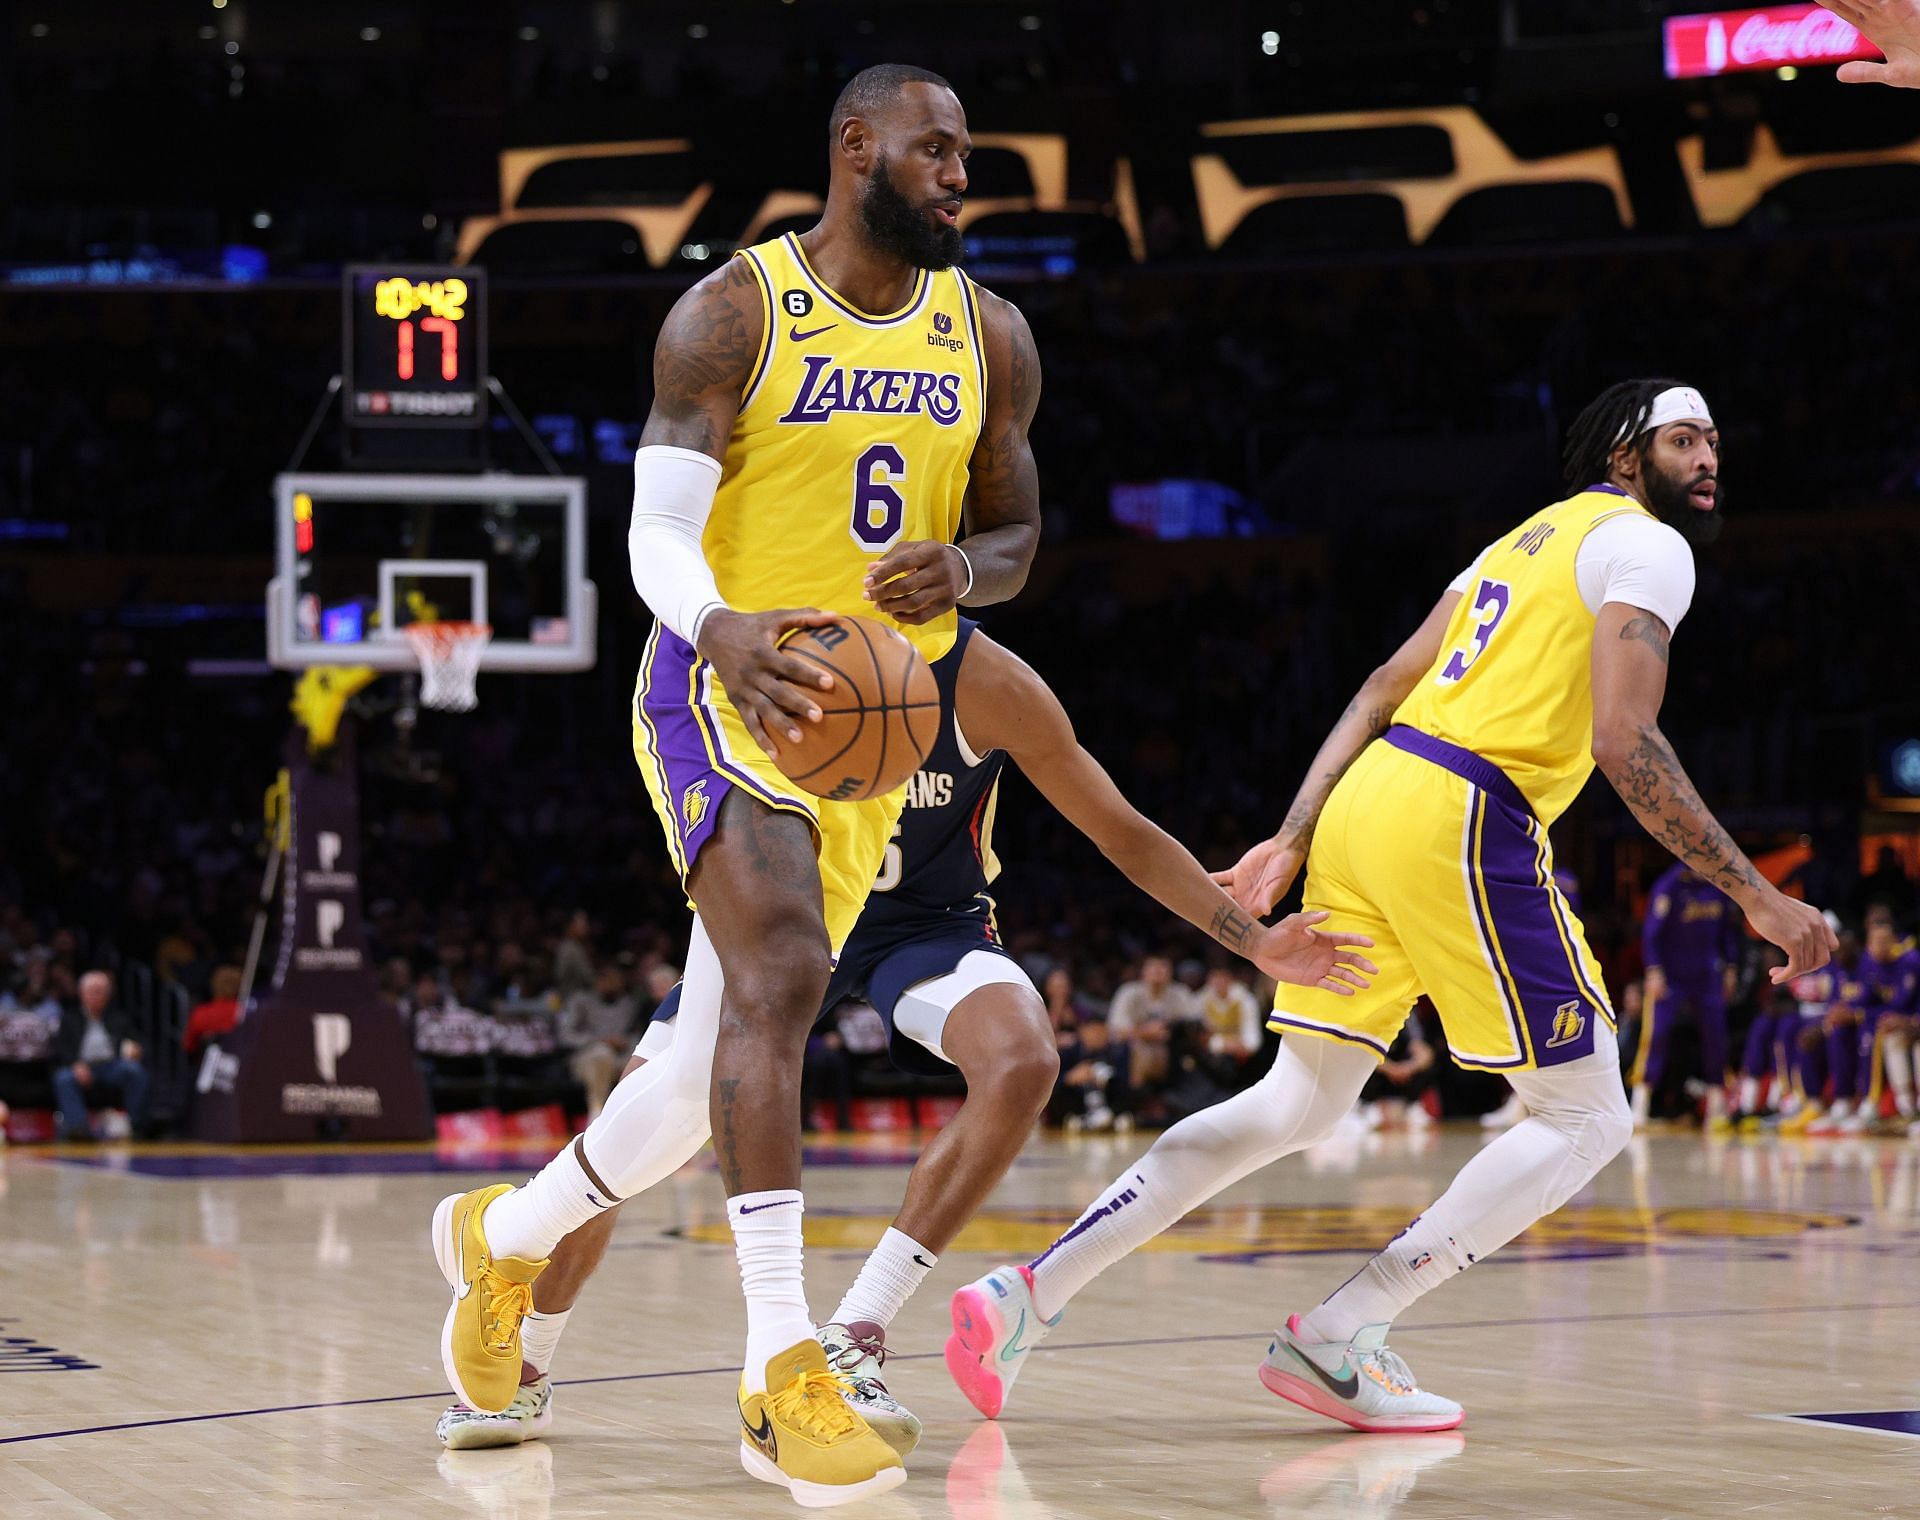 Heated scramble for LeBron James Nike shoes lands woman on injured list –  Boston Herald